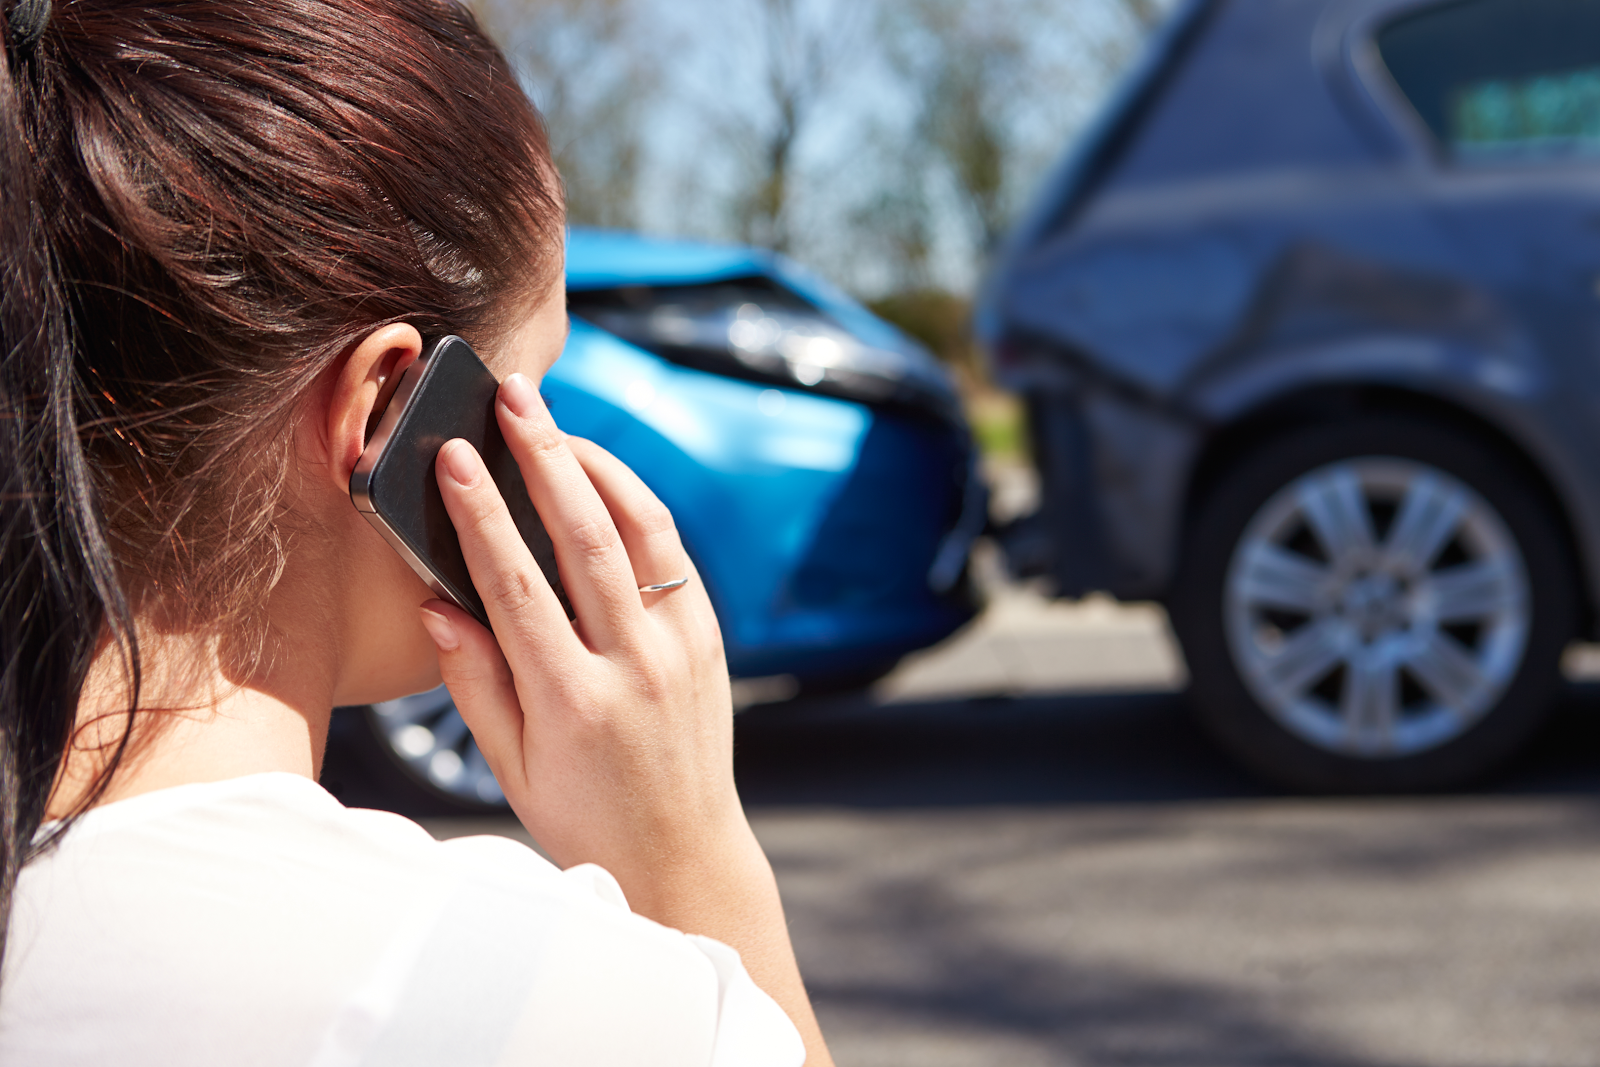 allstate auto insurance claims call after a car accident in florida